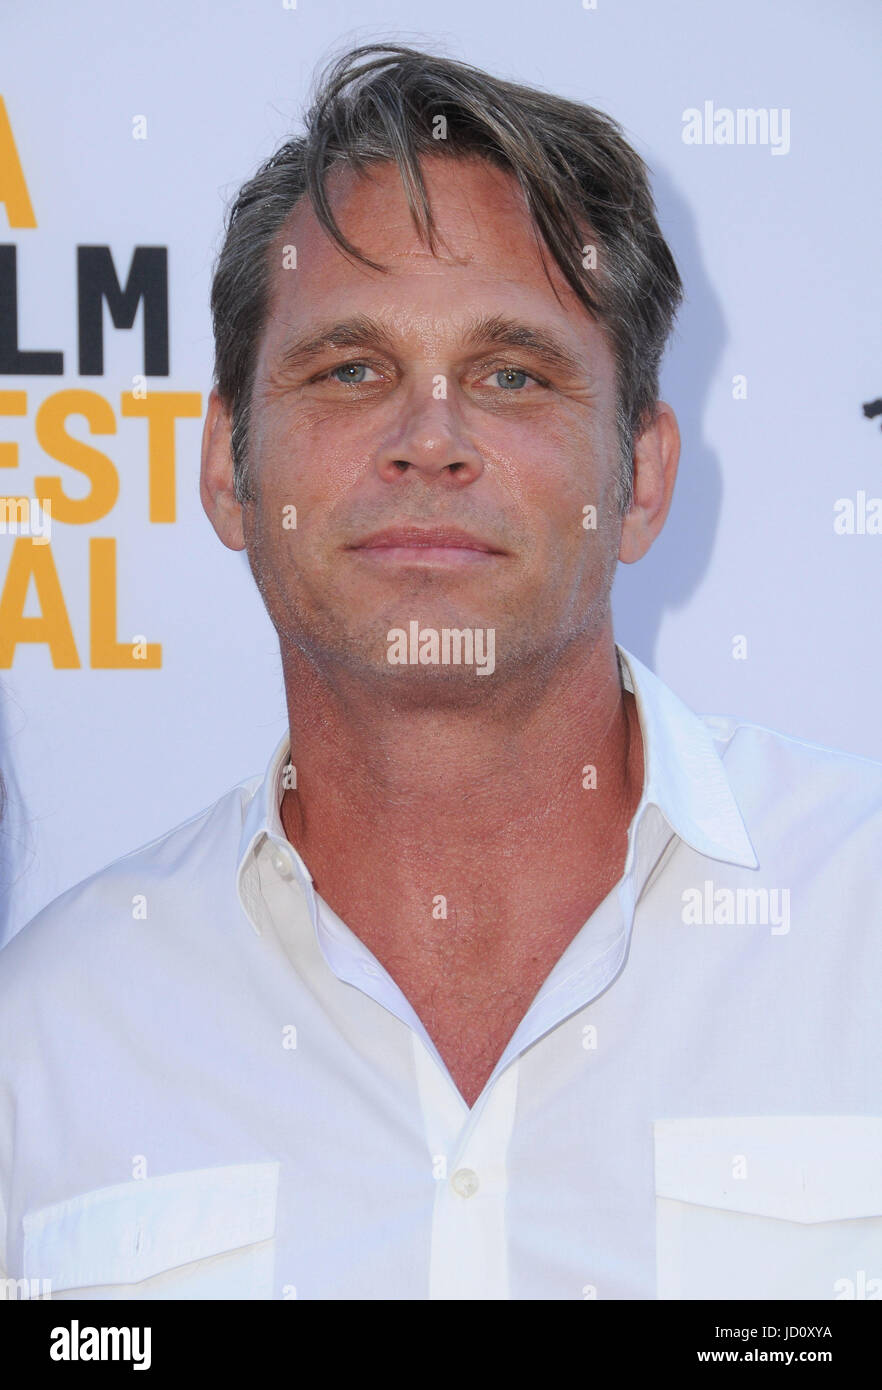 Culver City, CA, USA. 17th June, 2017. 17 June 2017 - Culver City, California - Chris Browning. LA Film Festival Premiere of ''Shot Caller'' held at ArcLight Culver City in Culver City. Photo Credit: Birdie Thompson/AdMedia Credit: Birdie Thompson/AdMedia/ZUMA Wire/Alamy Live News Stock Photo